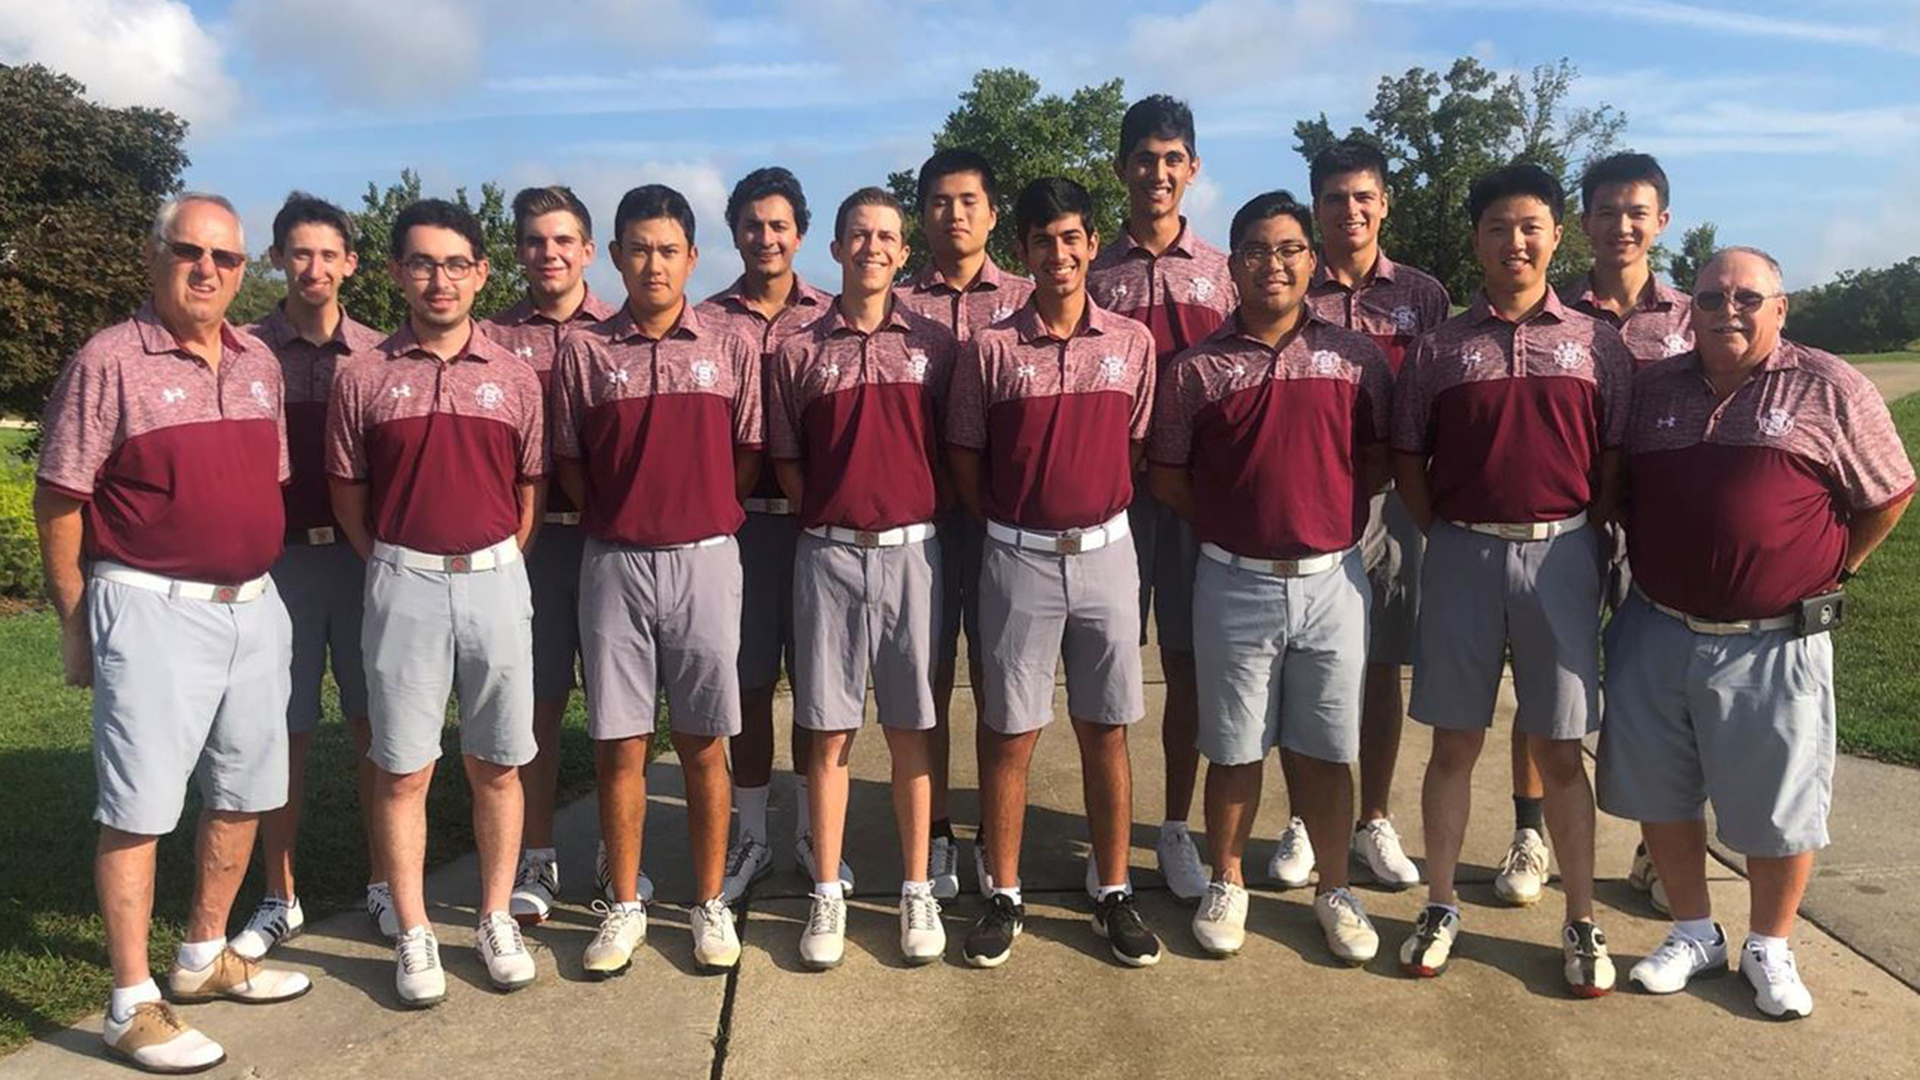 Swarthmore Men's Golf Honored for Top GPA in Division III